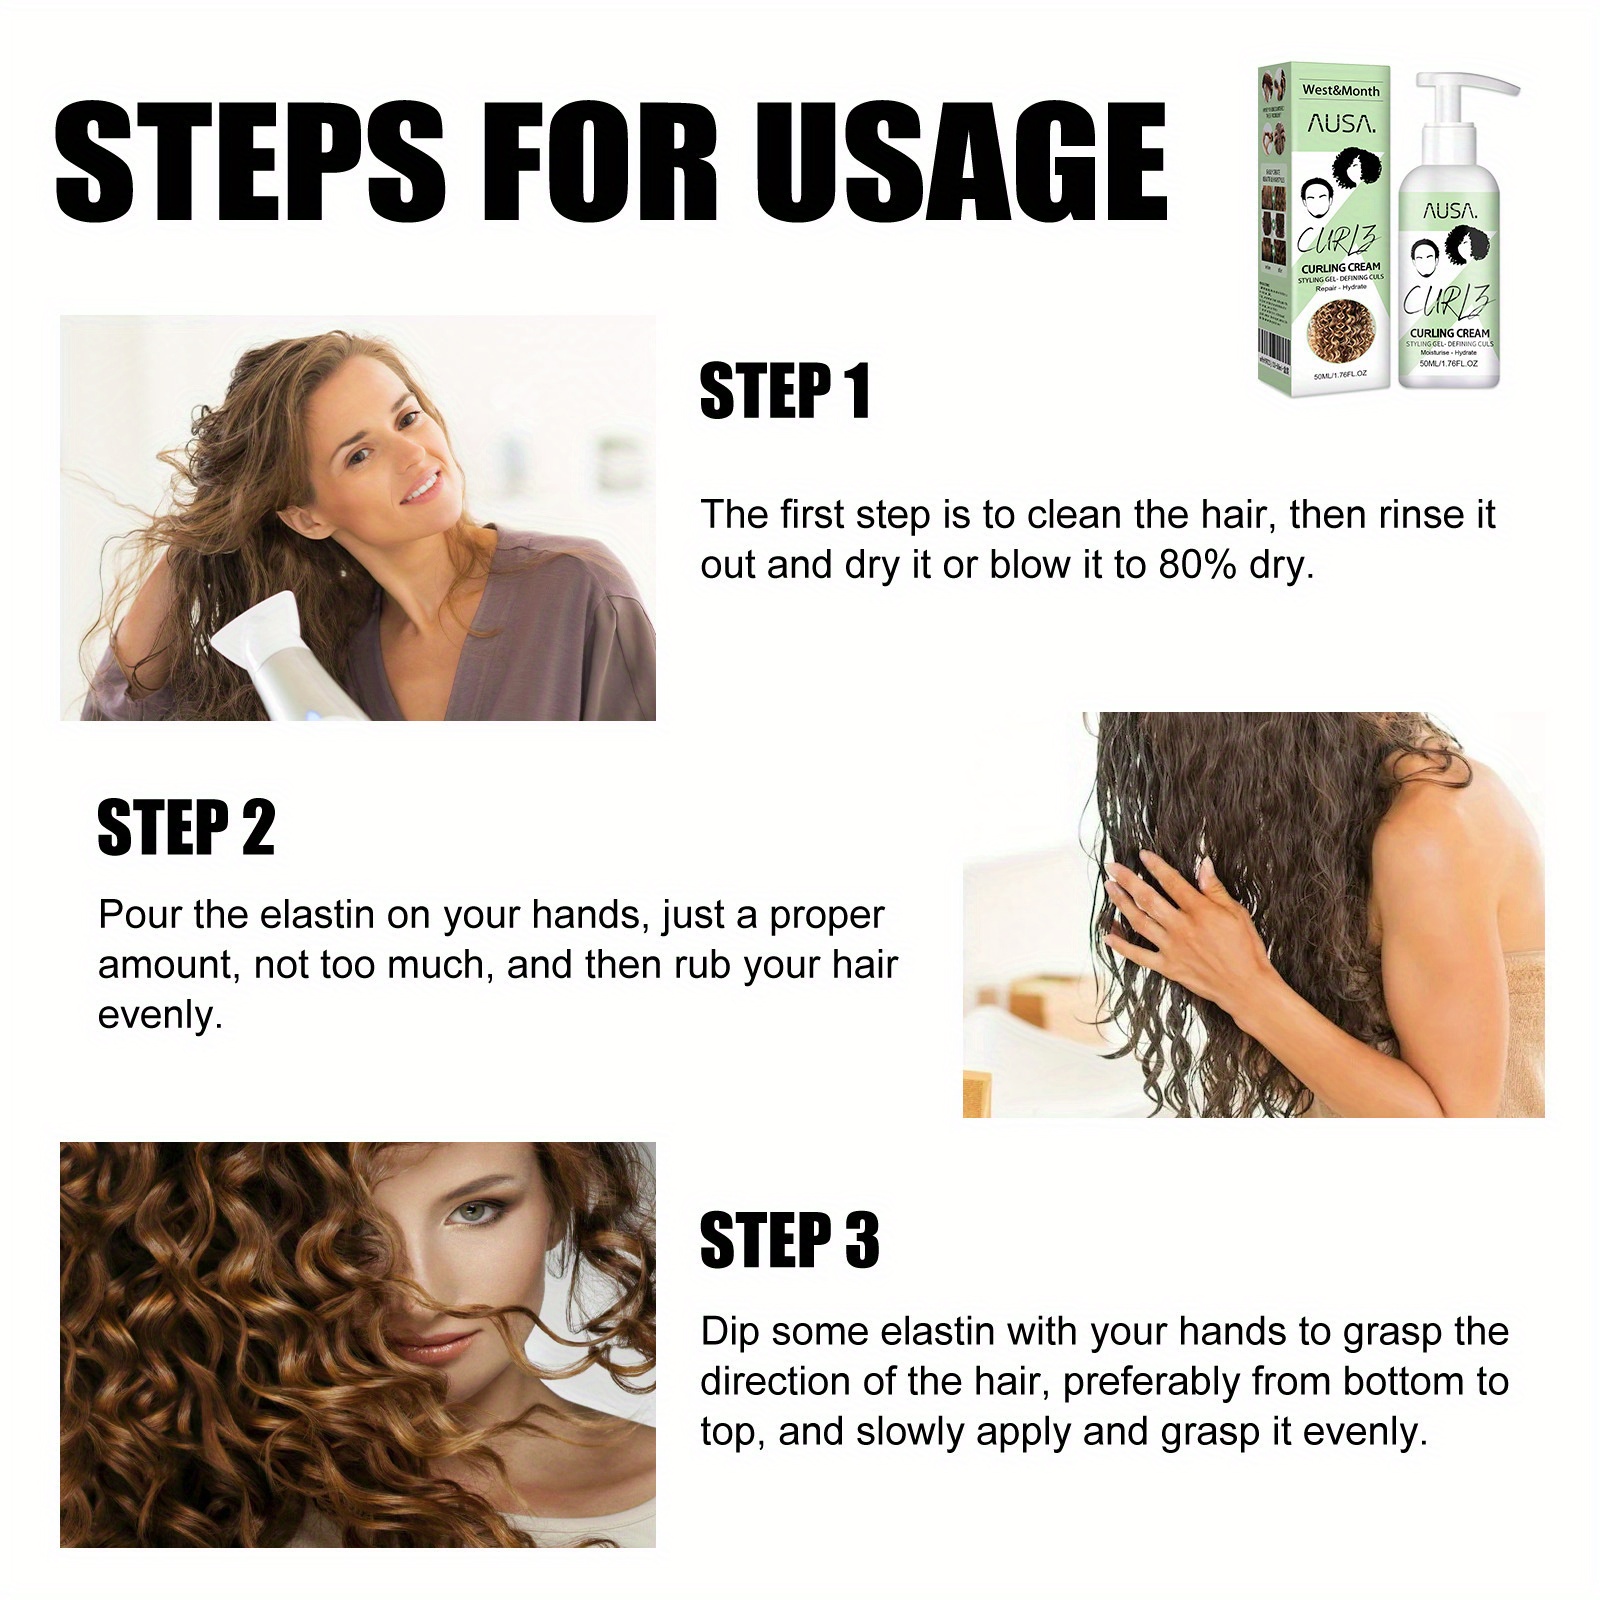 3 piece curly hair cream set moisturizing styling for all hair types frizz control volume boost